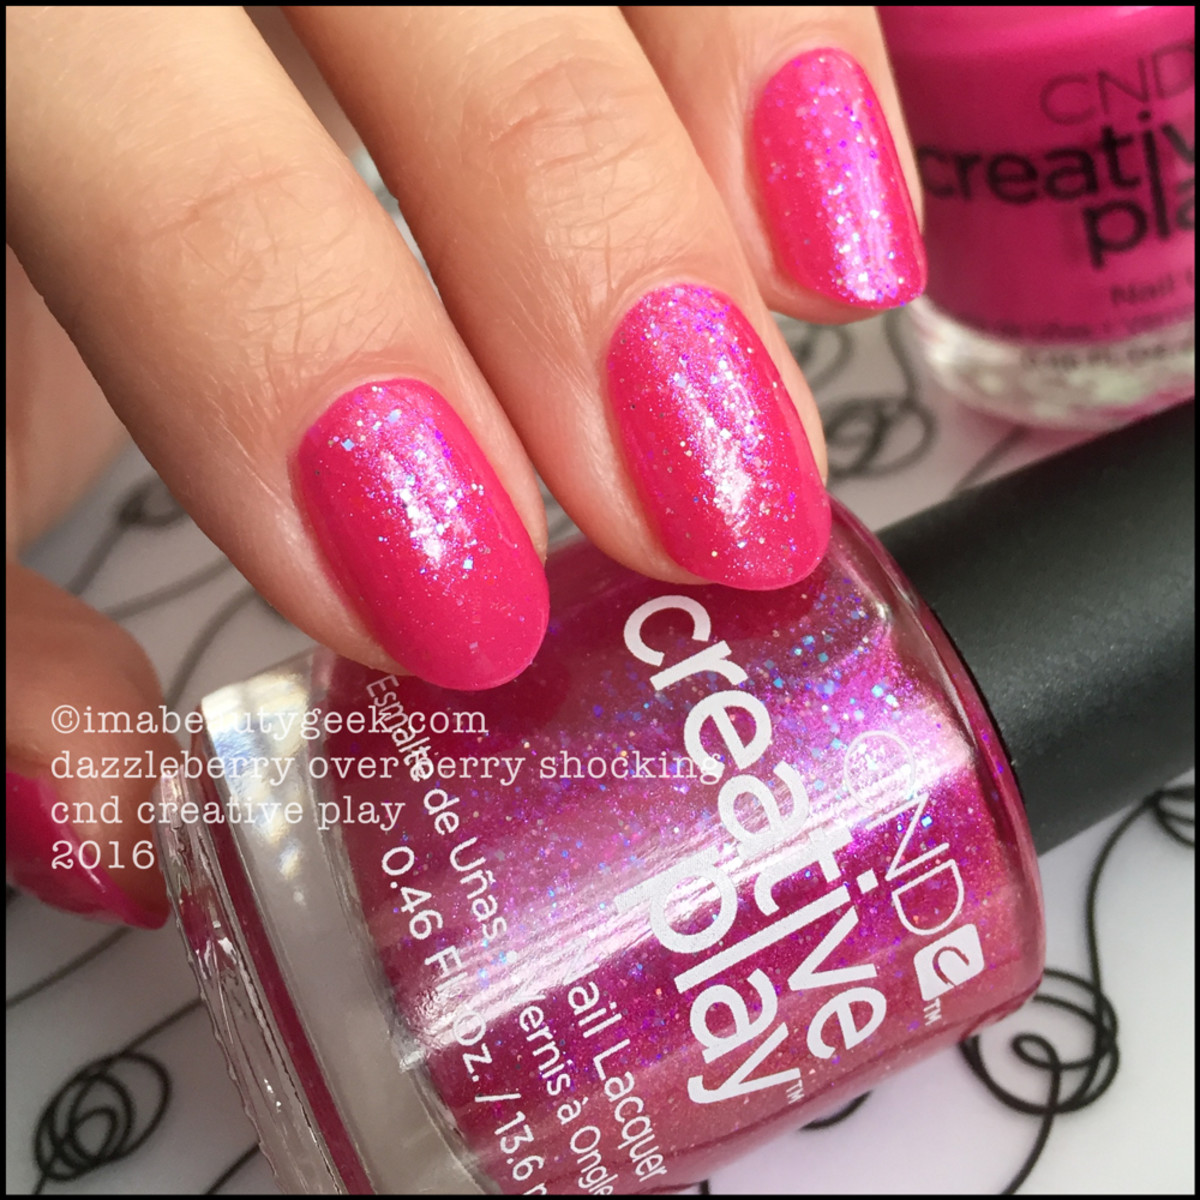 CND Creative Play Dazzleberry over Berry Shocking_Creative Play Nail Polish Lacquer